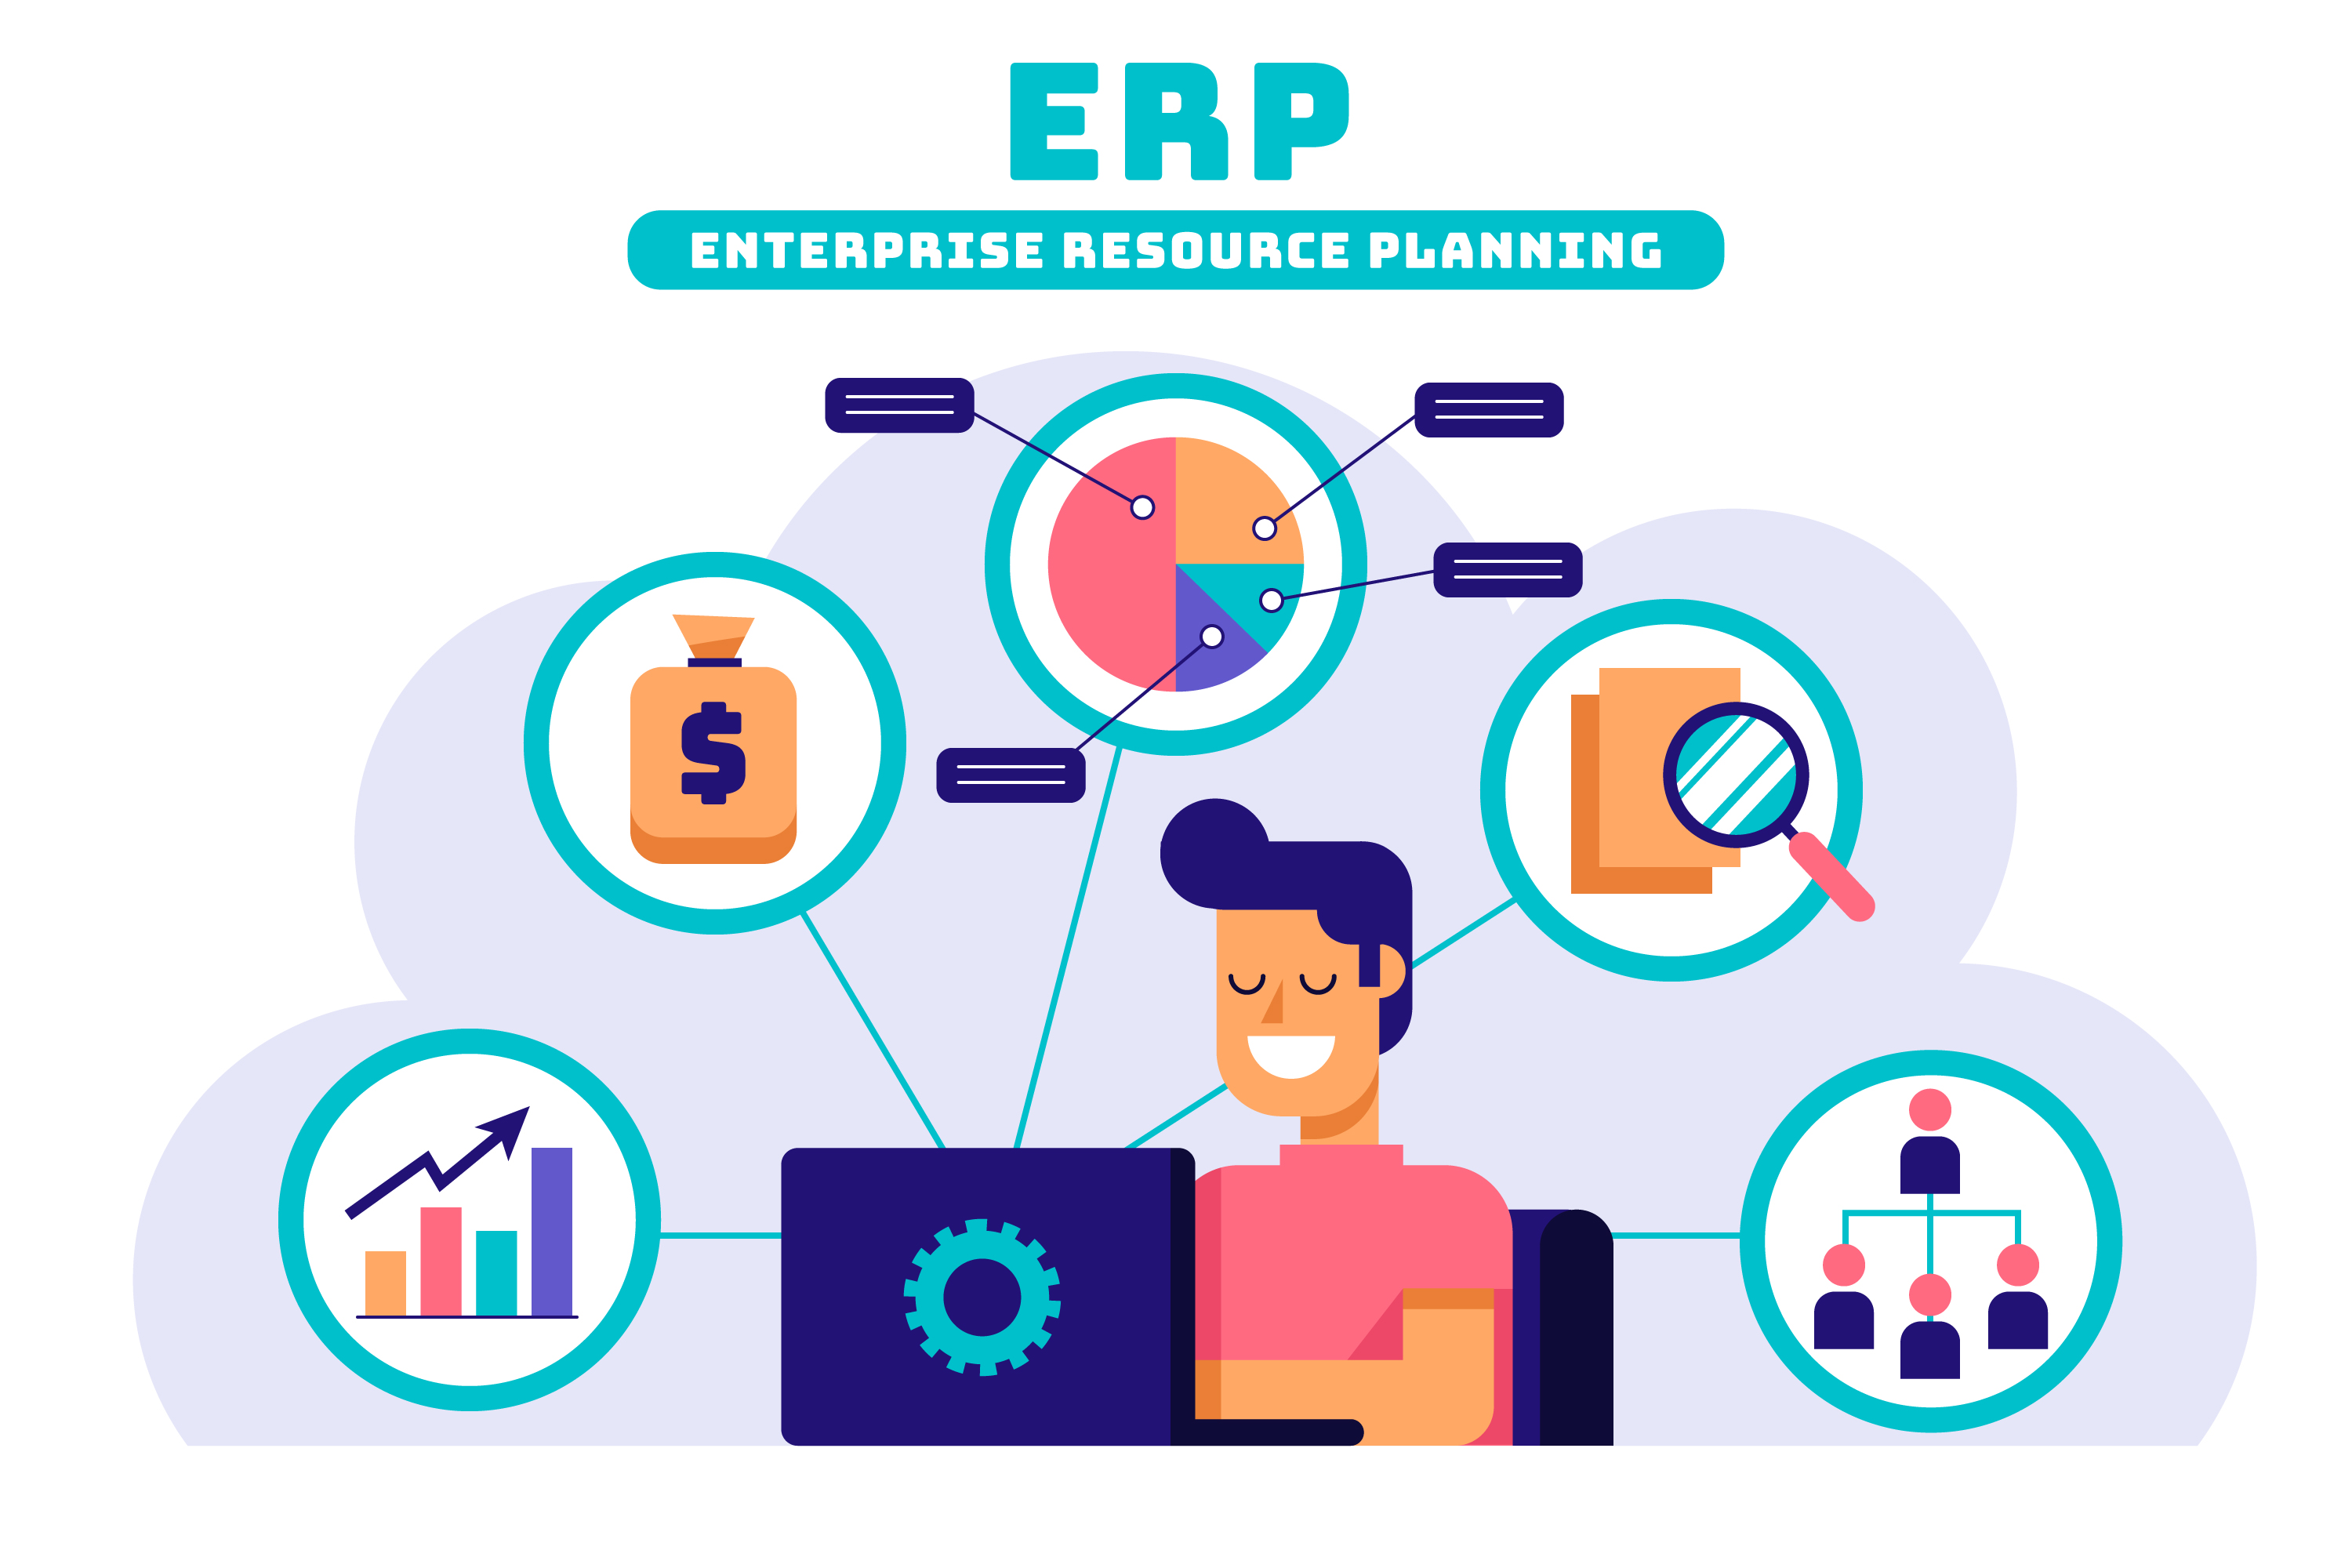 How to Promote User Adoption during an Implementation of a New ERP Solution